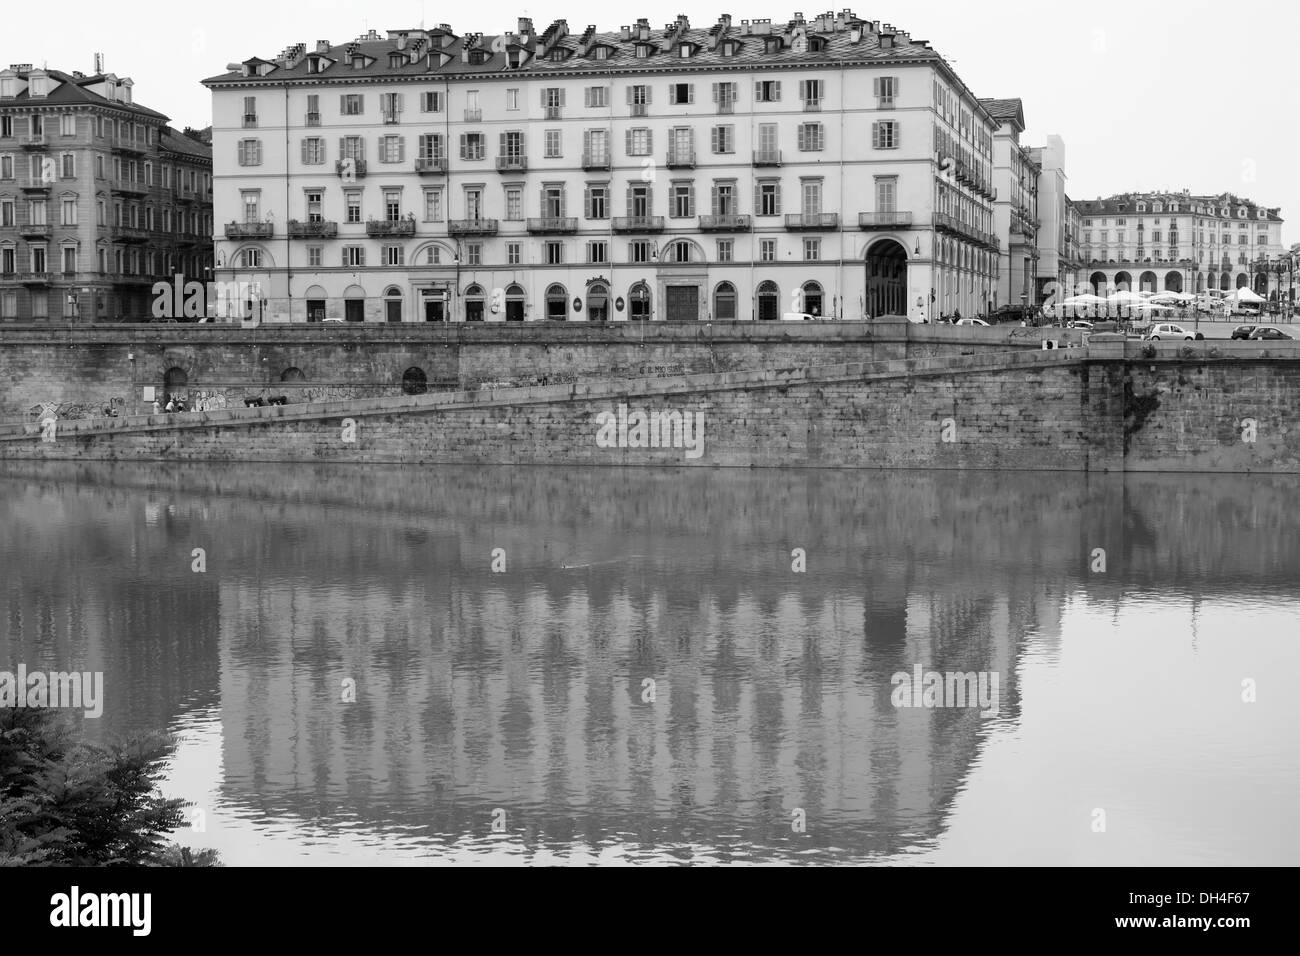 Looking across to a building on Lungo Po Armando Diaz with reflections in the Po River, Torino, Italy. Stock Photo